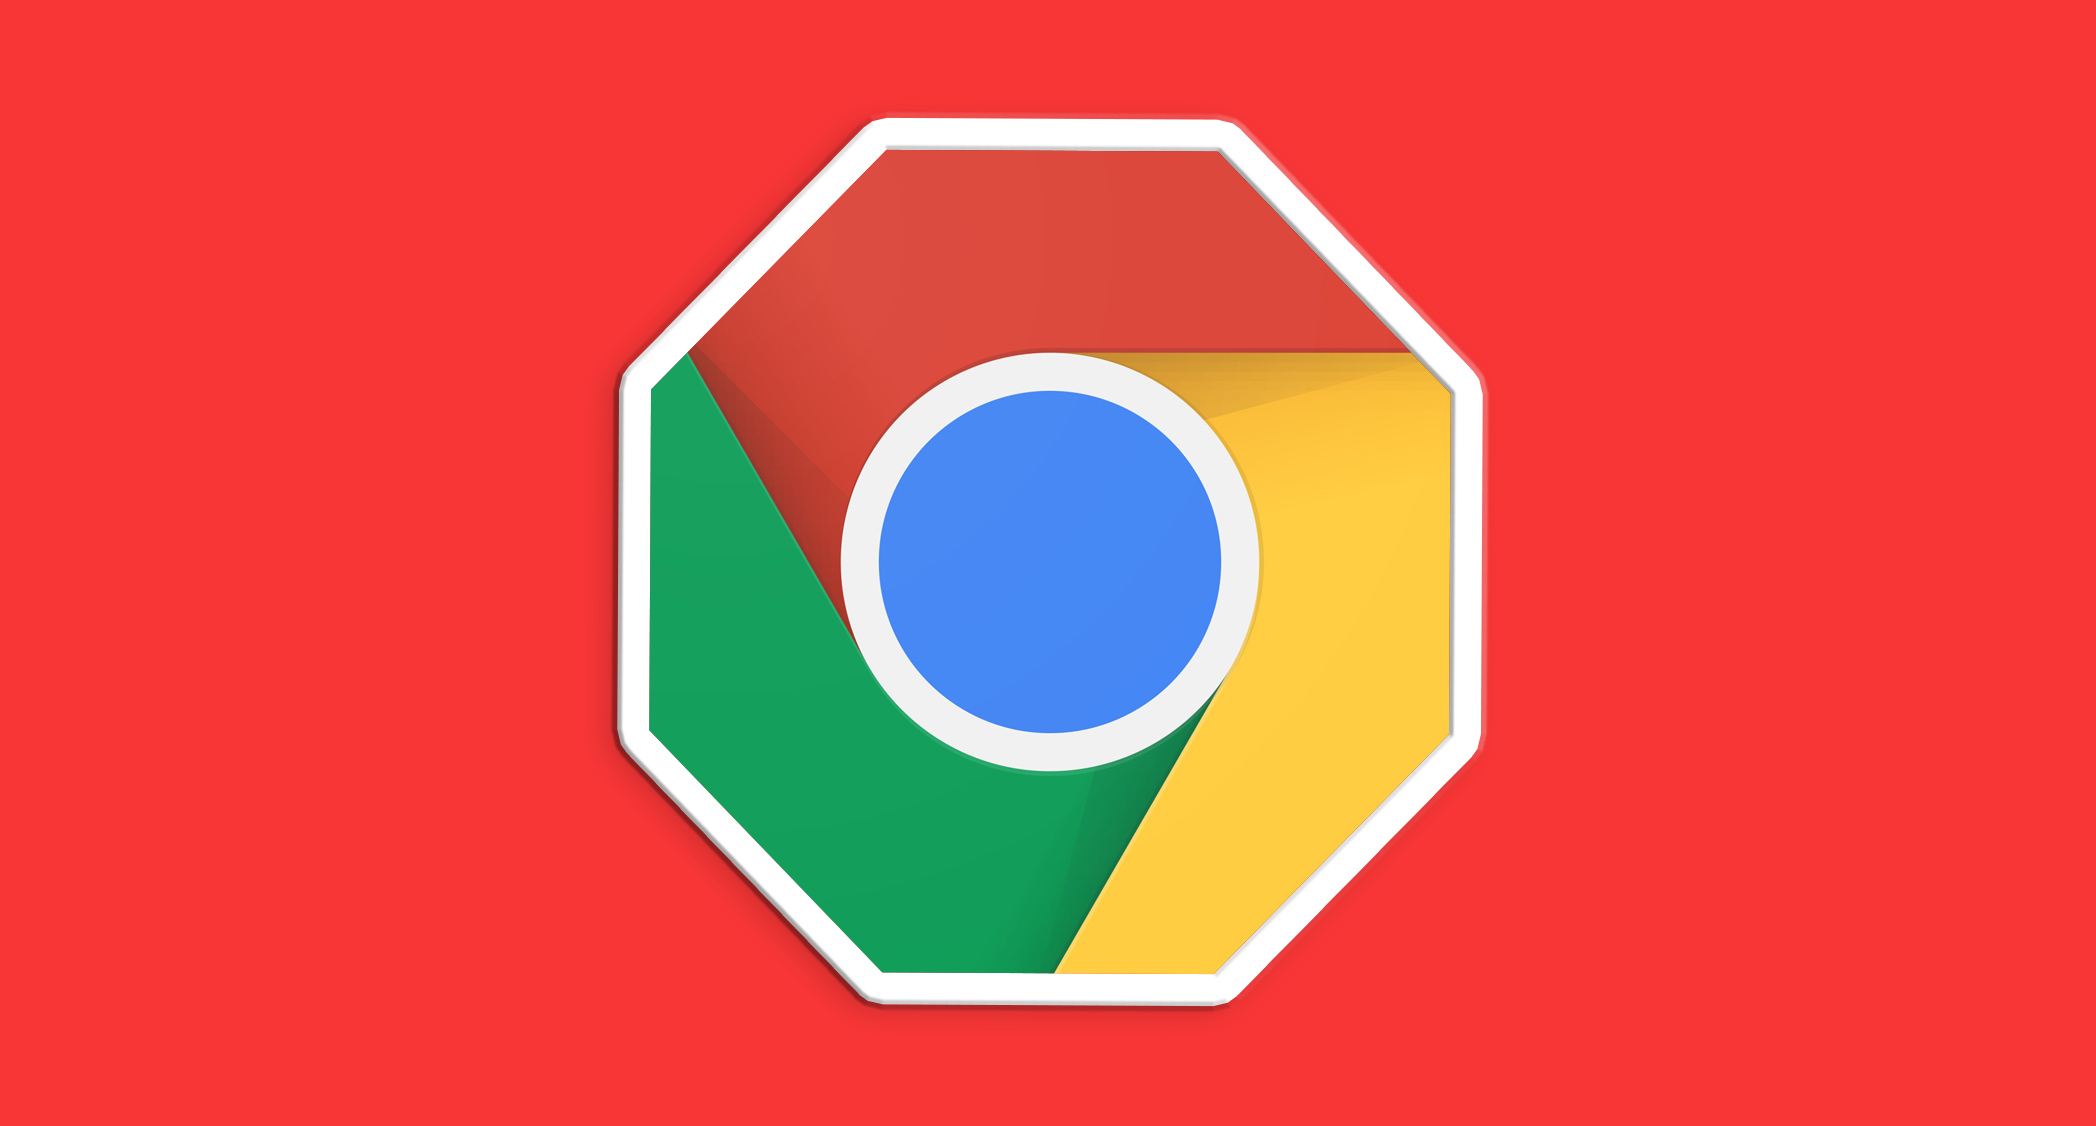 Google all set to launch it’s built-in ad-blocker for Chrome!